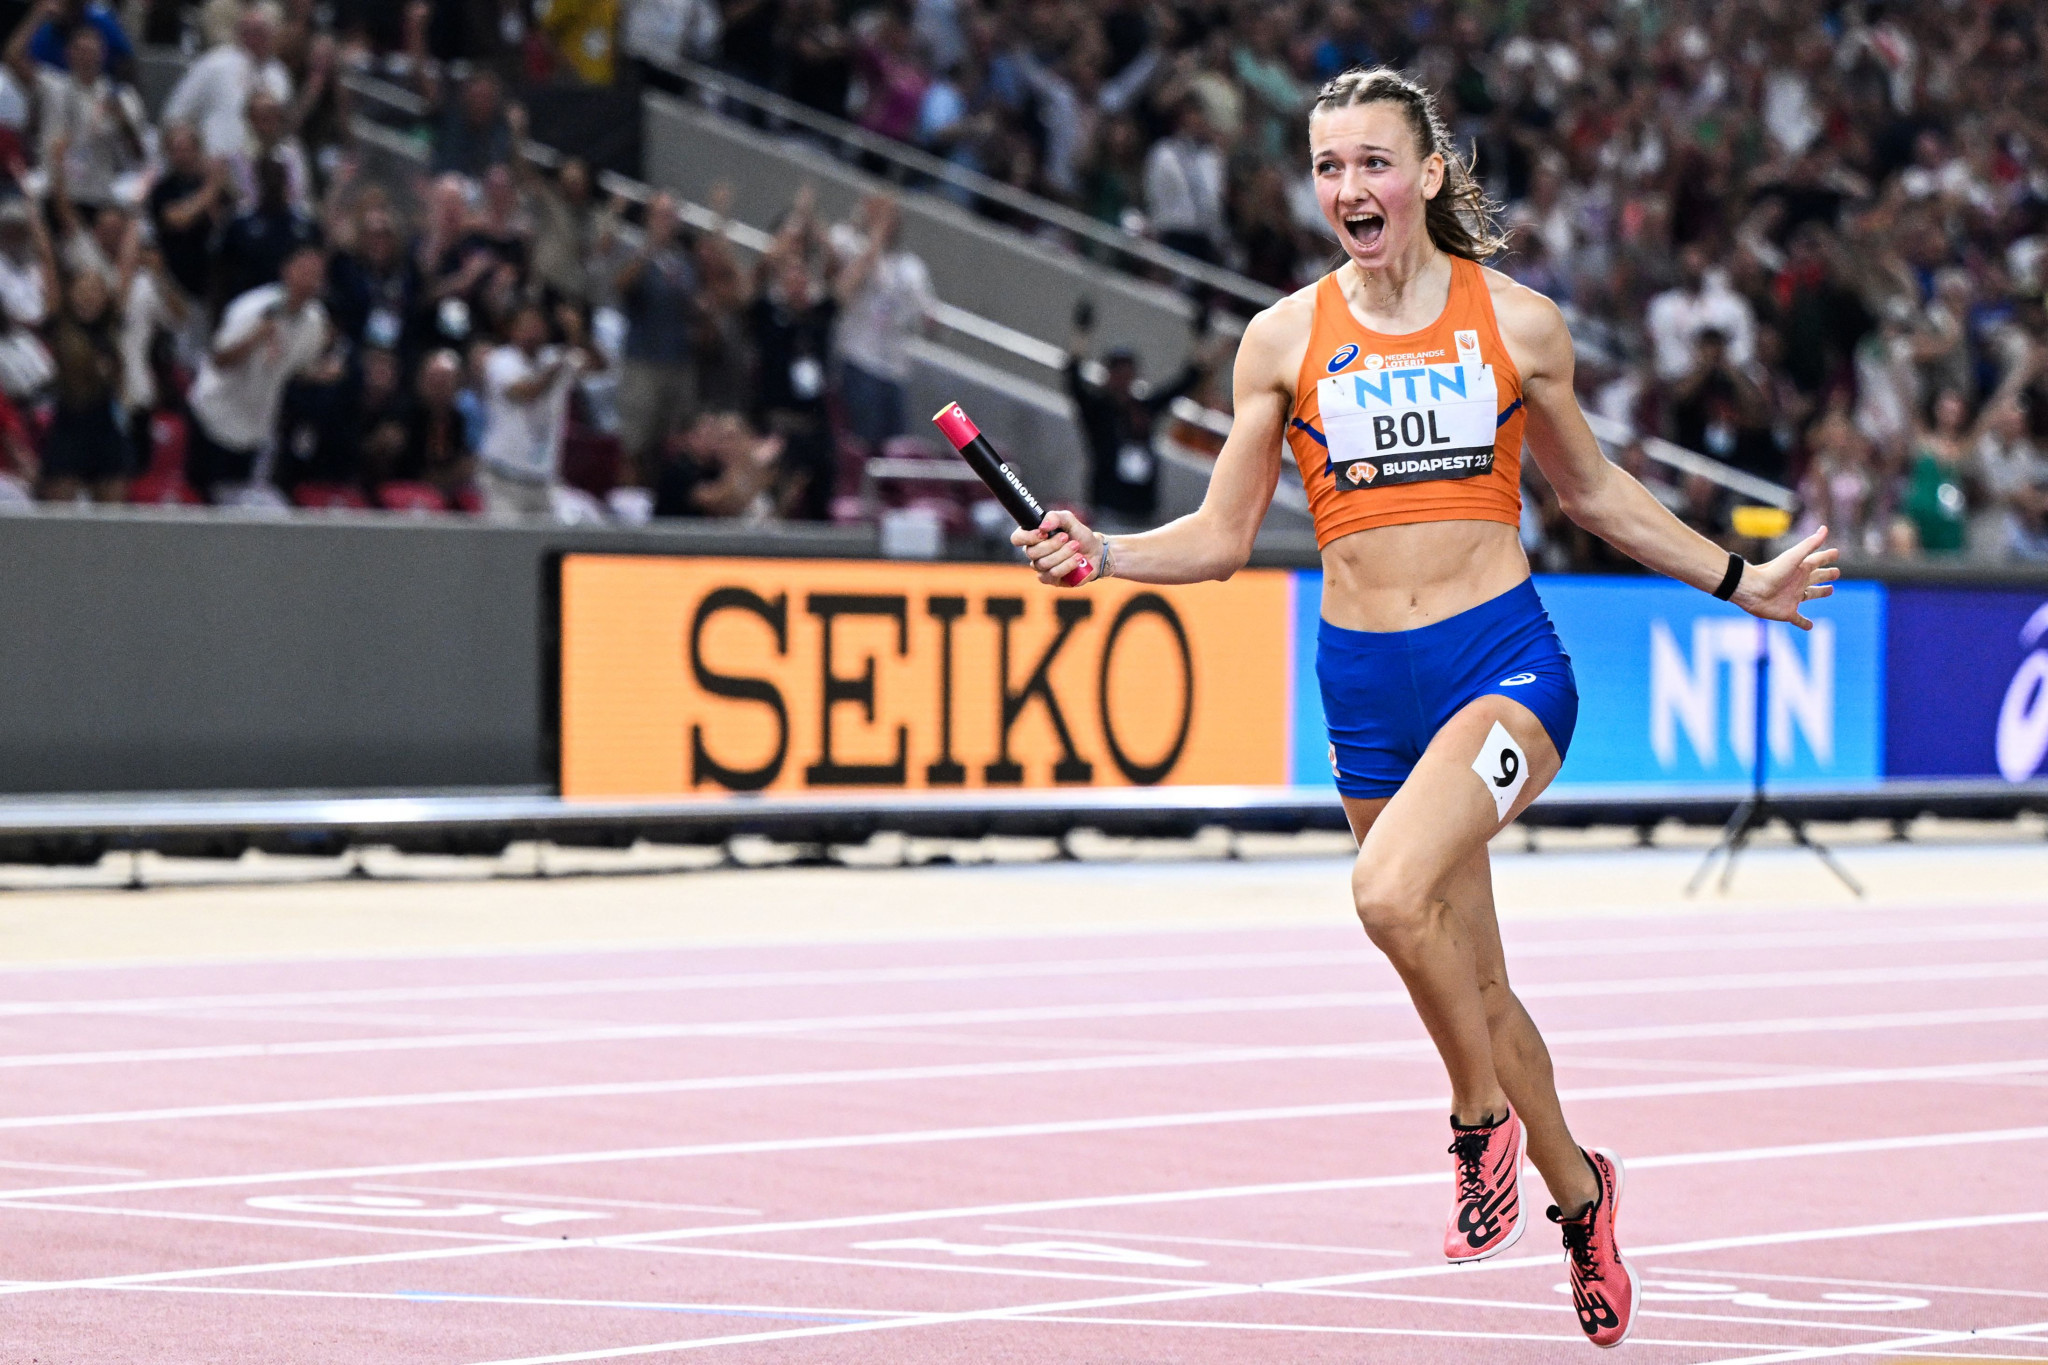 Bol hauls Dutch to women's 4x400m relay gold in final act of World Athletics Championships